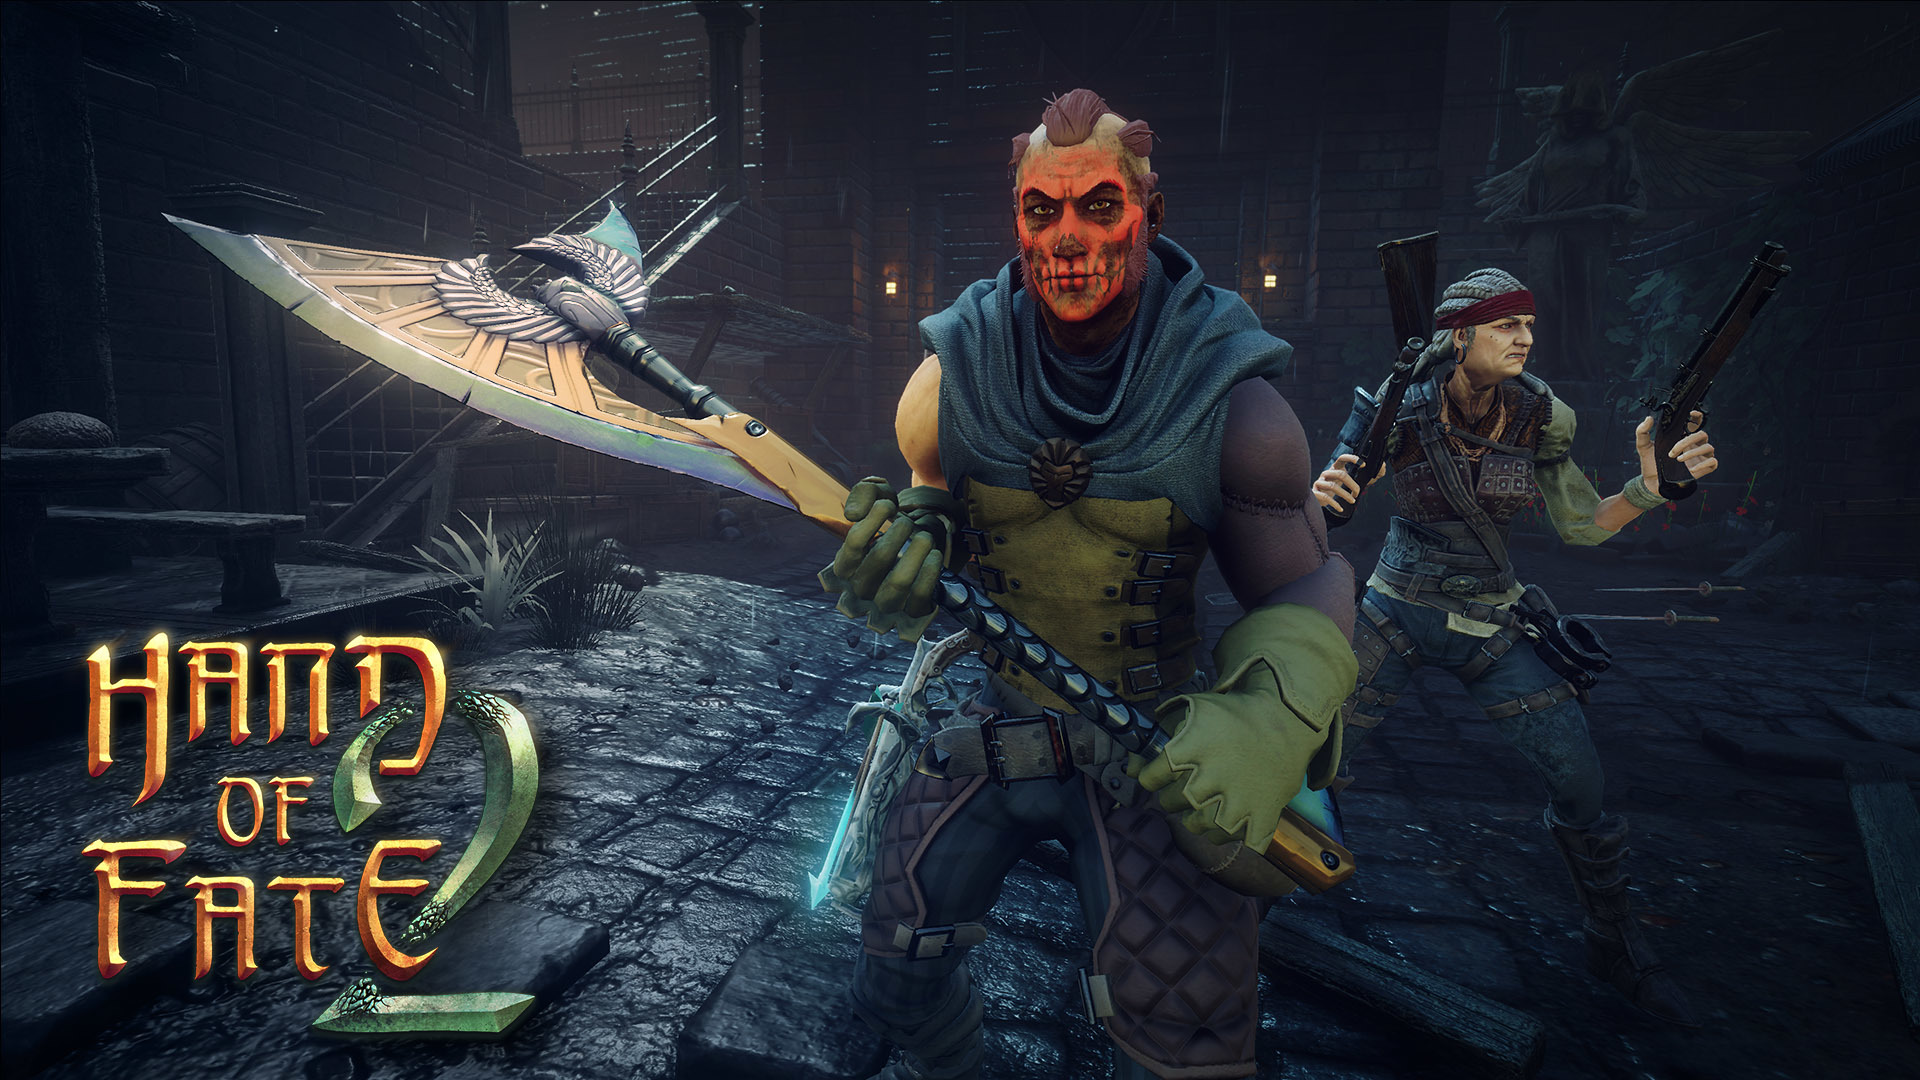 hand-of-fate-2-hand-of-fate-2-a-cold-hearth-dlc-is-out-now-steam-news